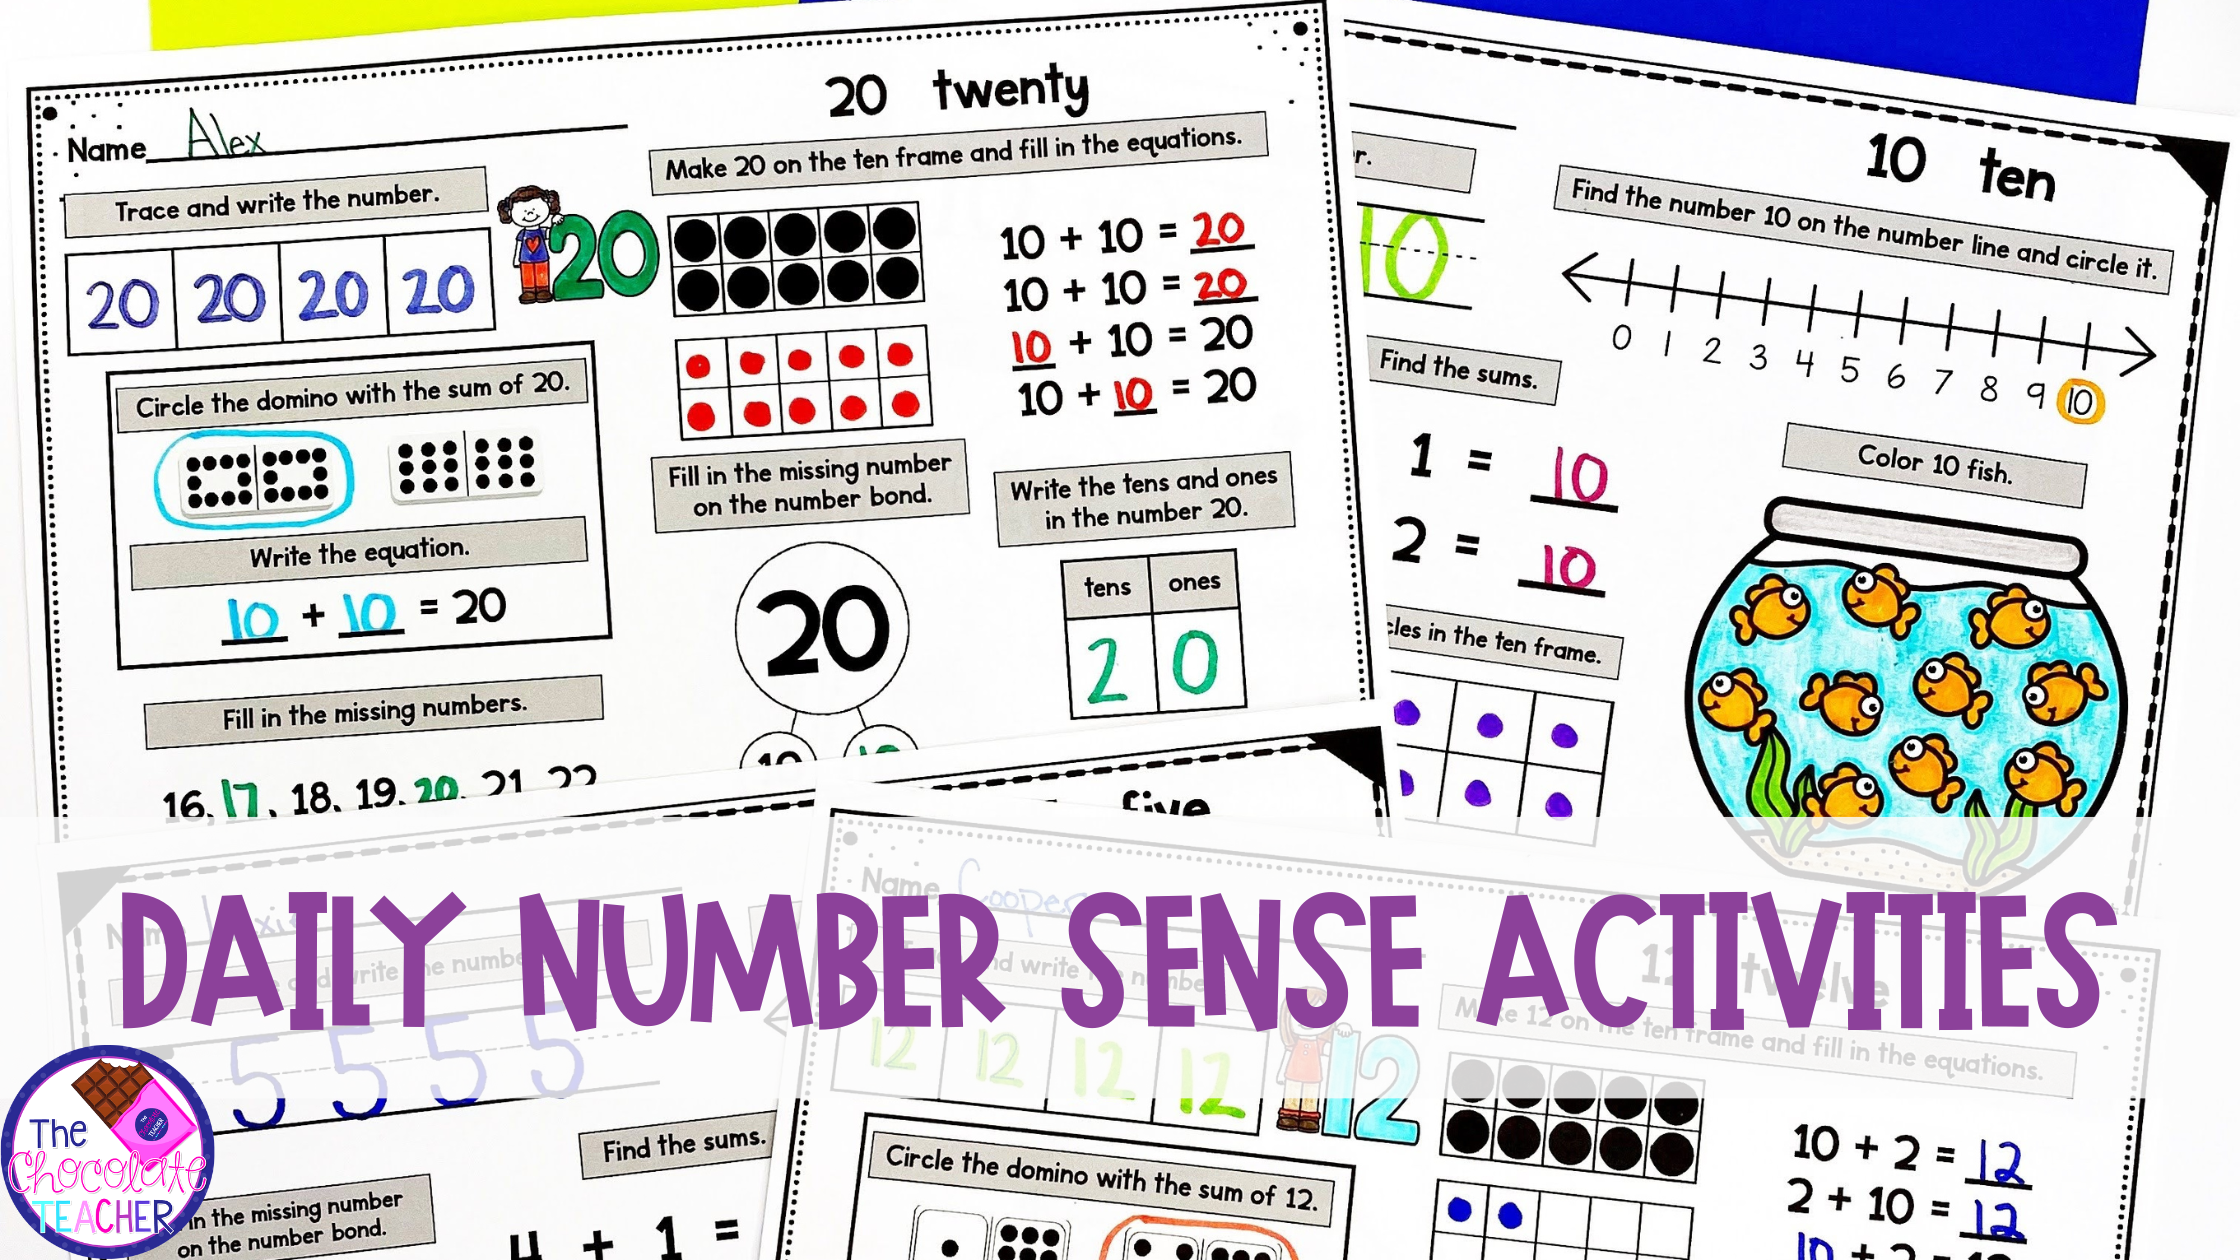 Using fun and engaging activities like these will make your daily number sense learning a breeze.